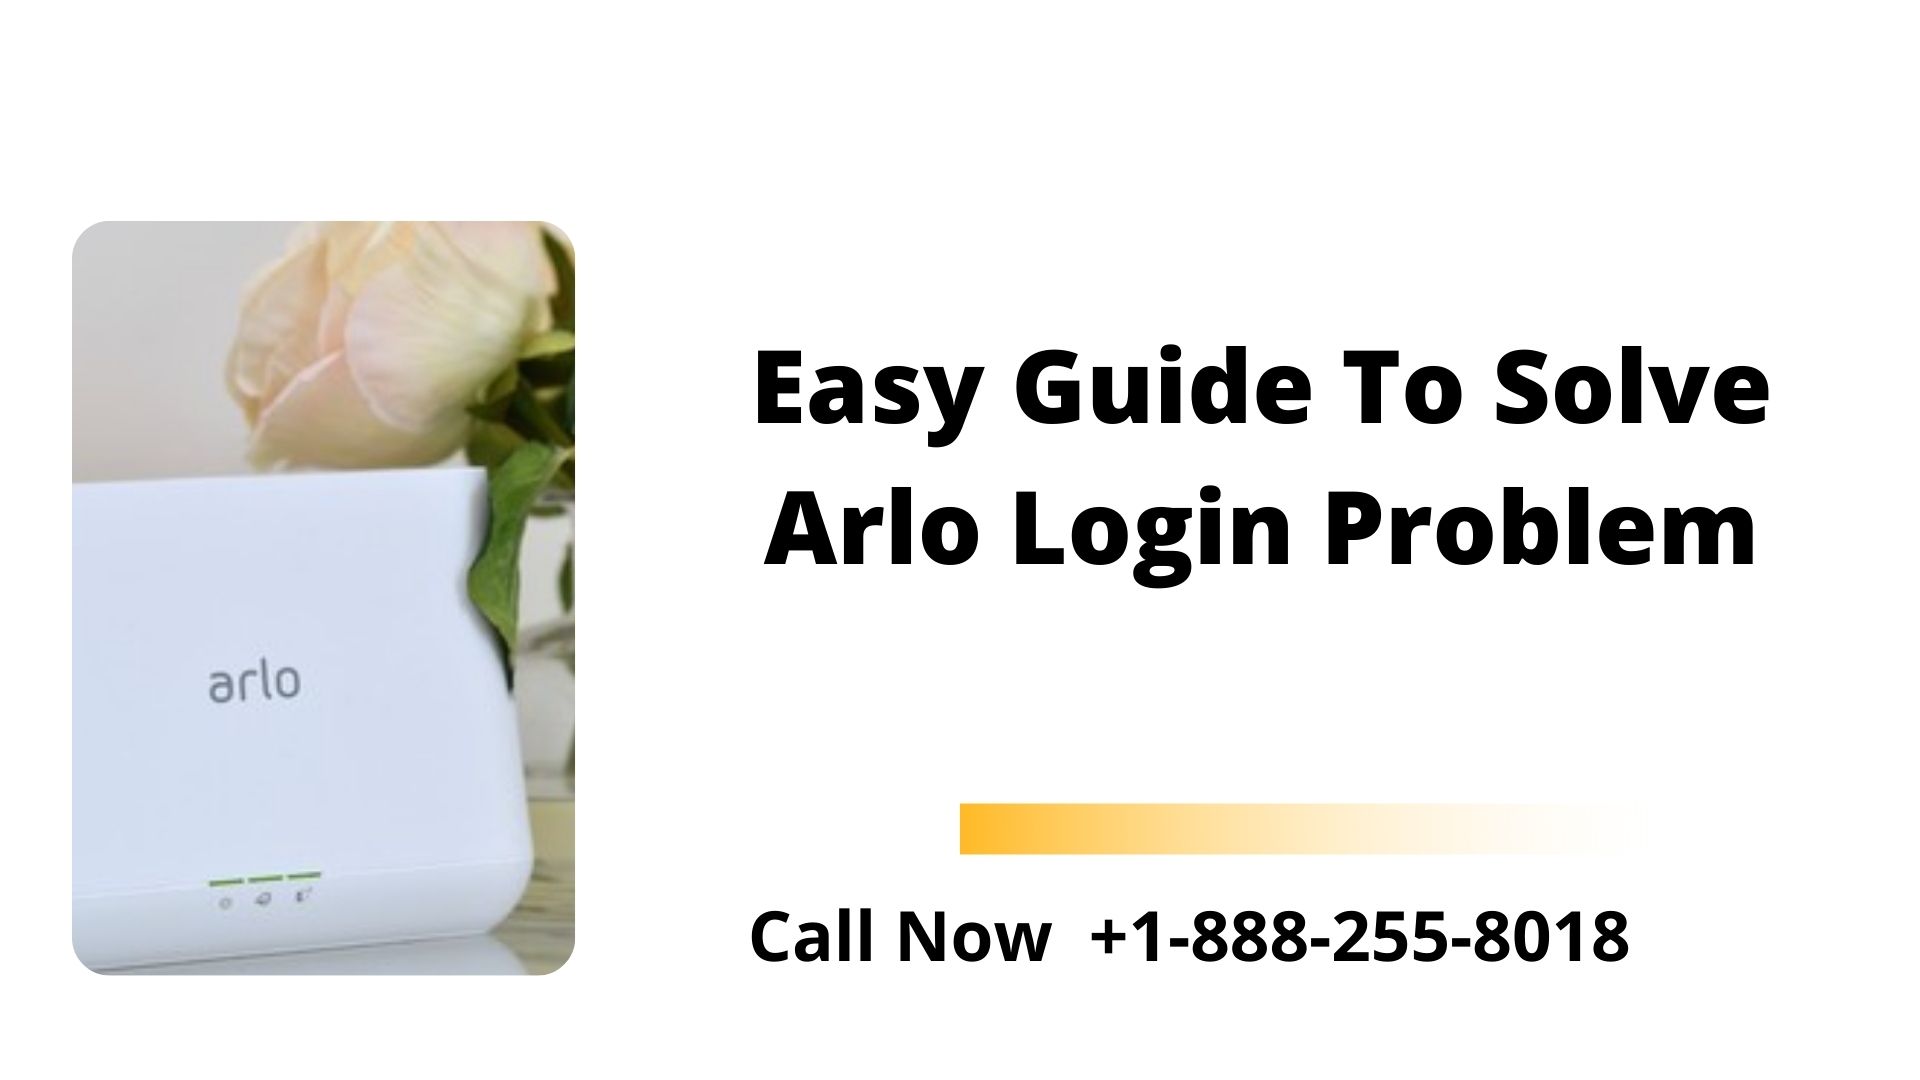 To The Arlo Login Problem | +1-888-255-8018 | 01